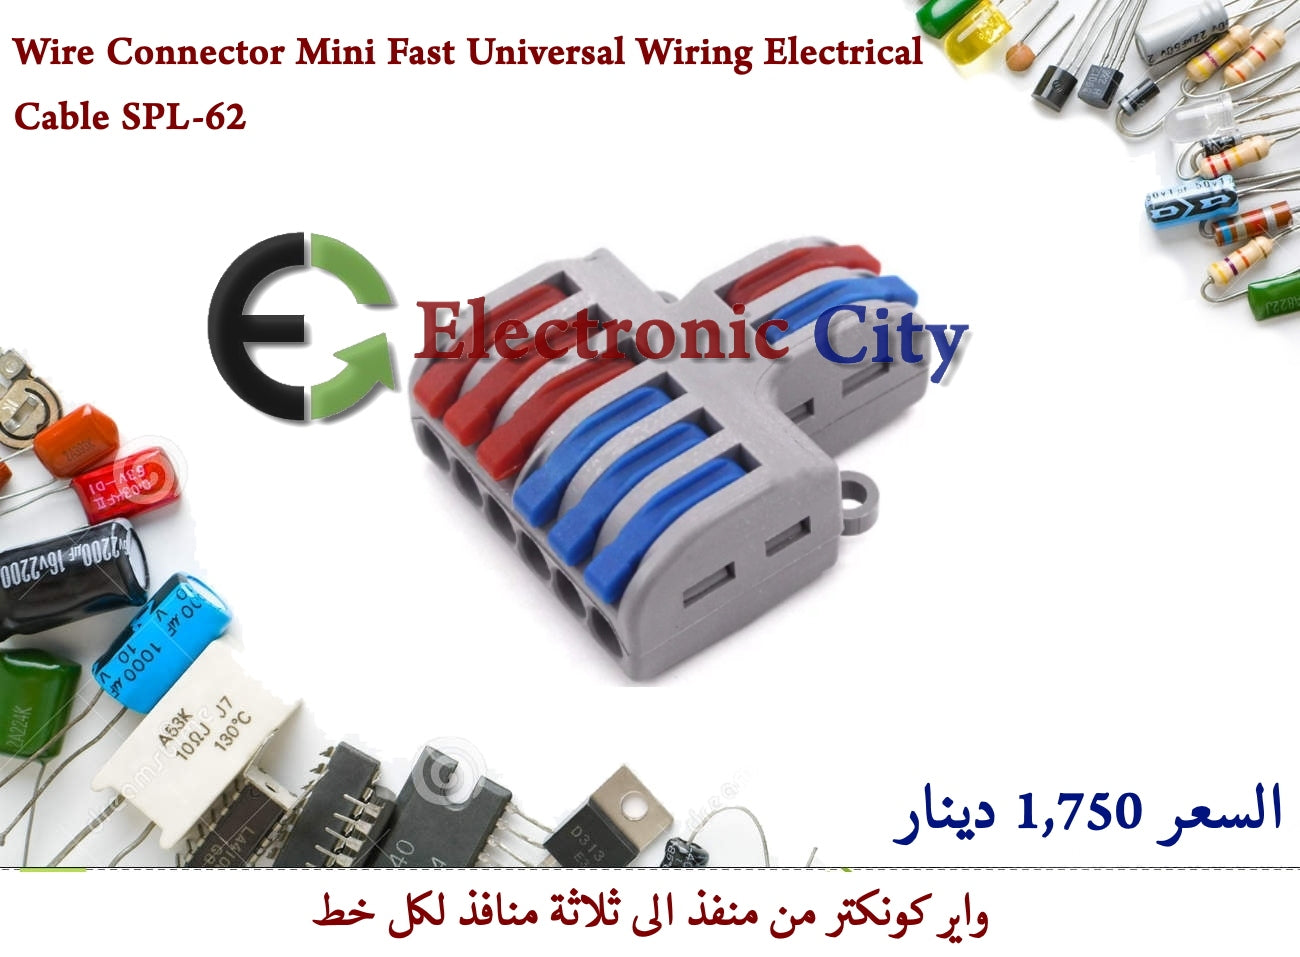 Wire Connector Mini Fast Universal Wiring Electrical Cable SPL-62